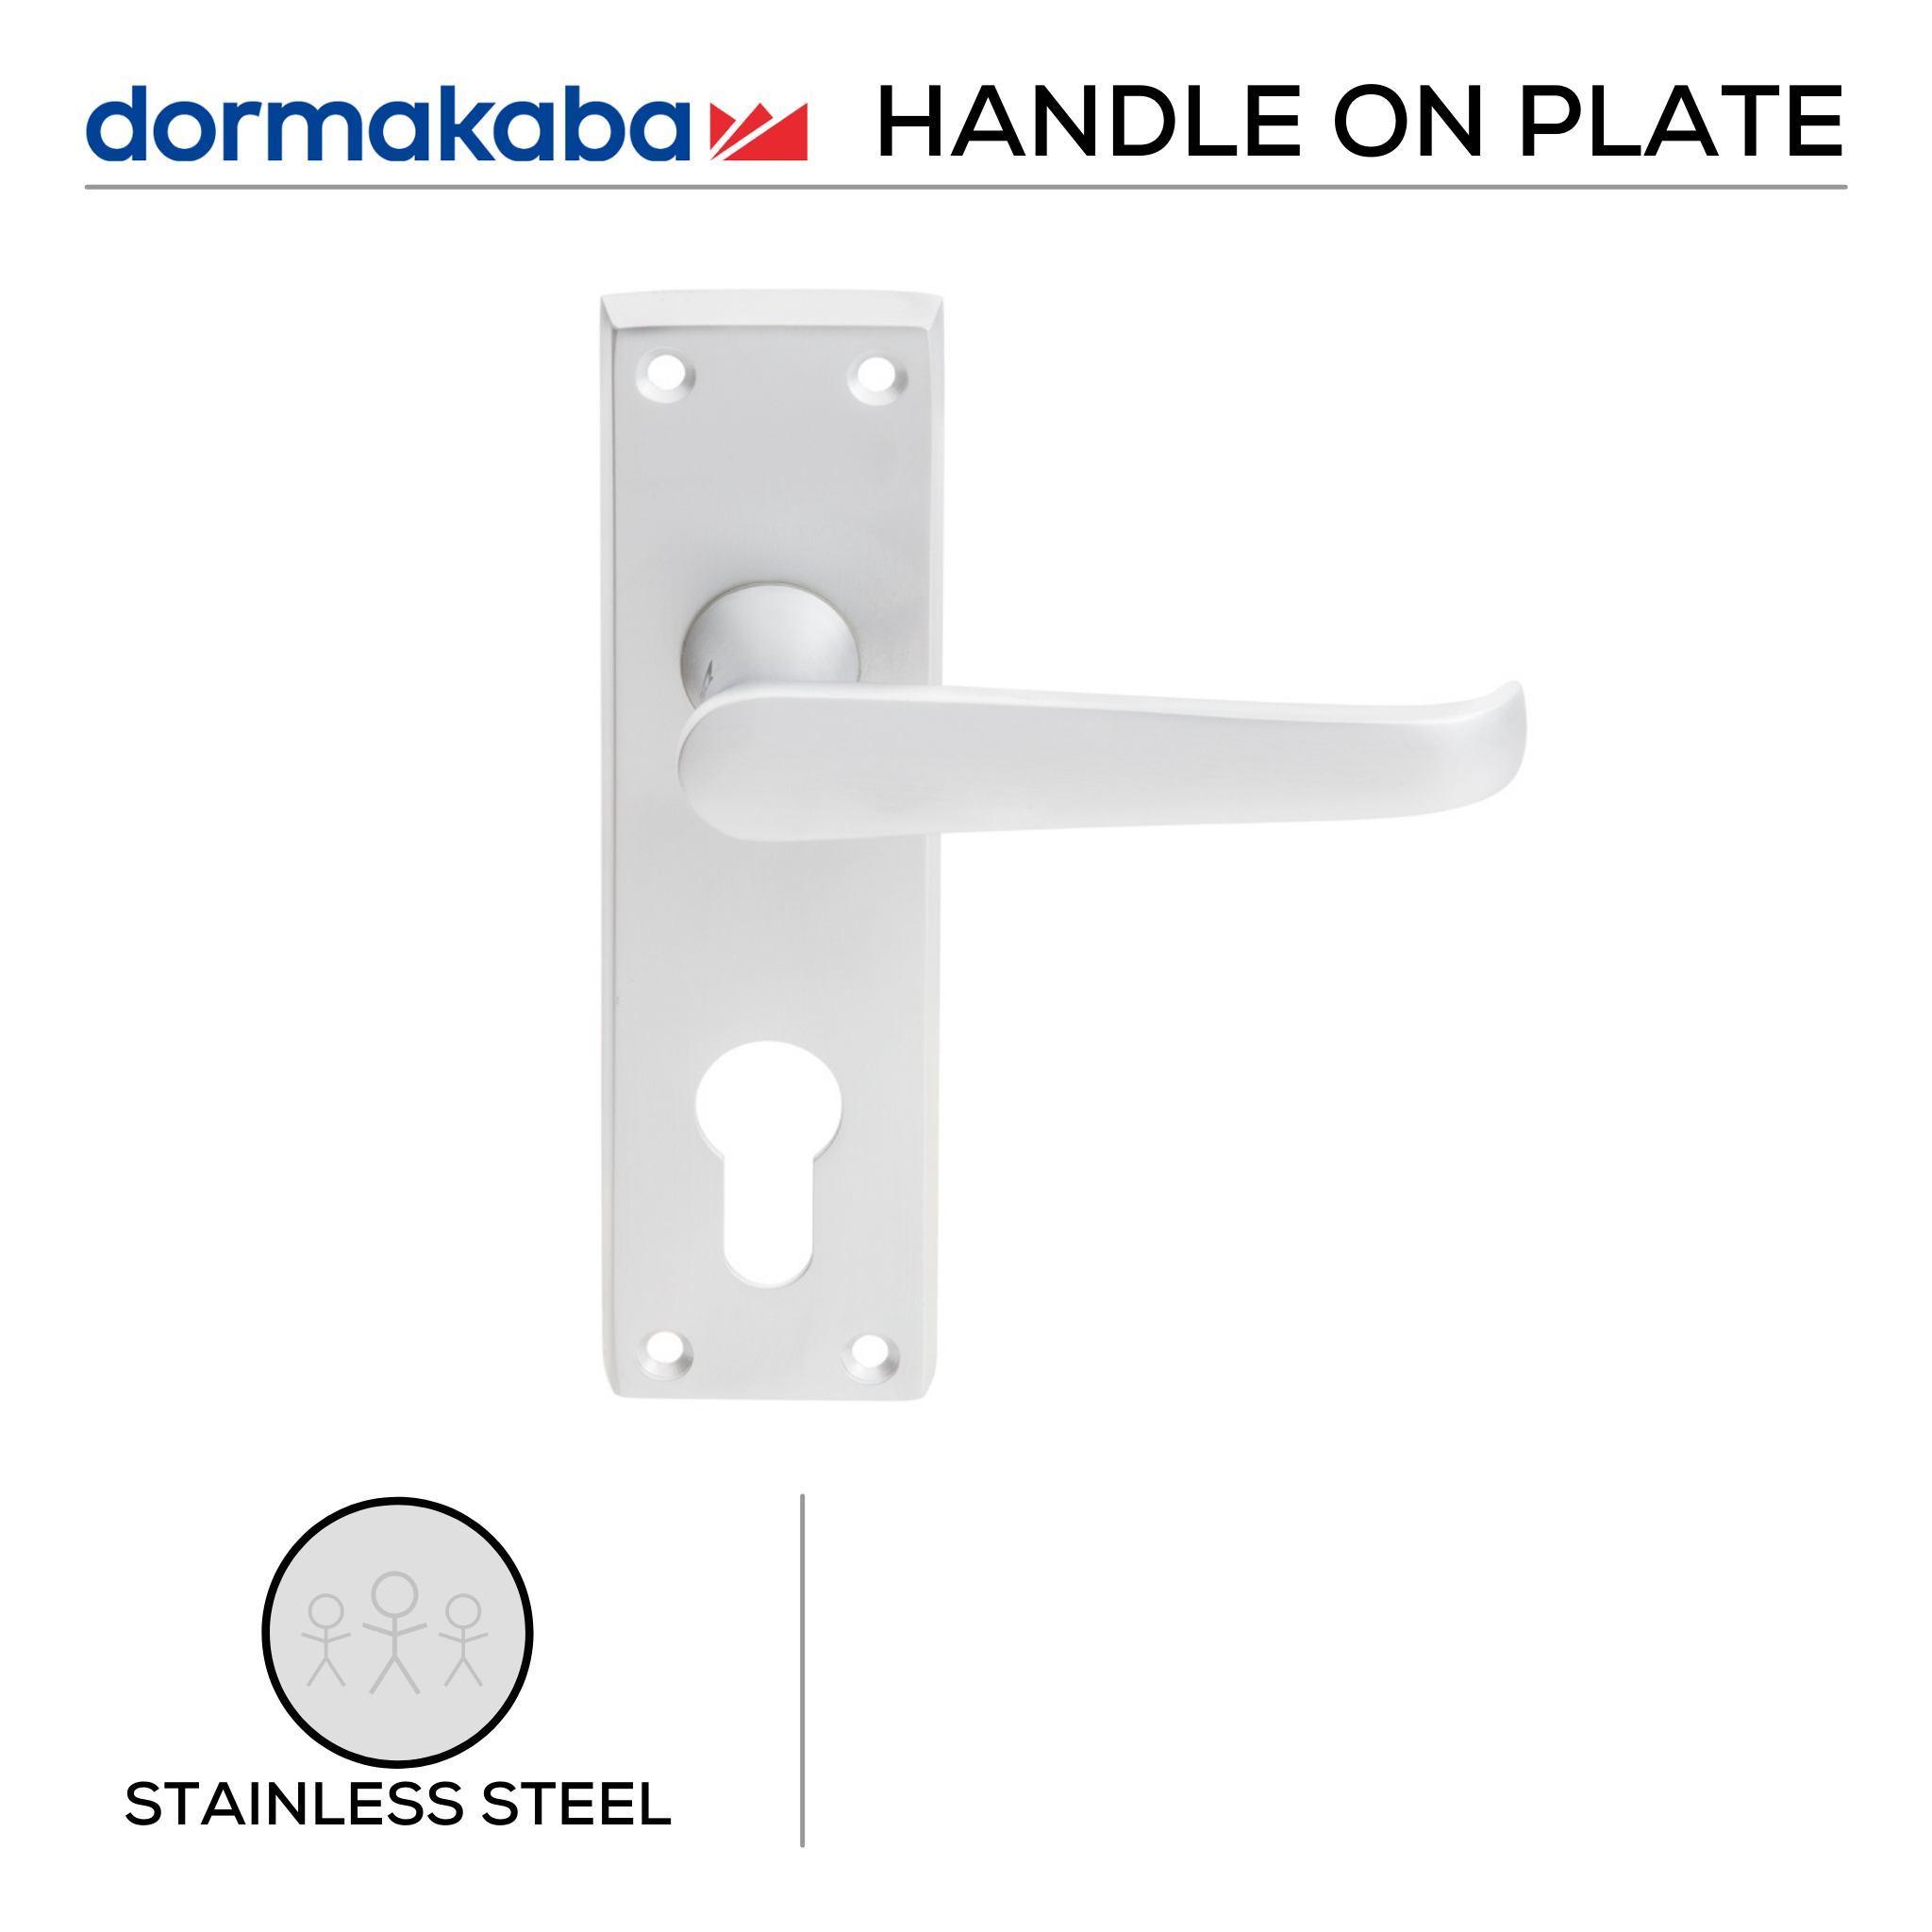 CB 30 Cylinder, Lever Handles, Solid, On Plate, 110mm (l), Satin Chrome, DORMAKABA